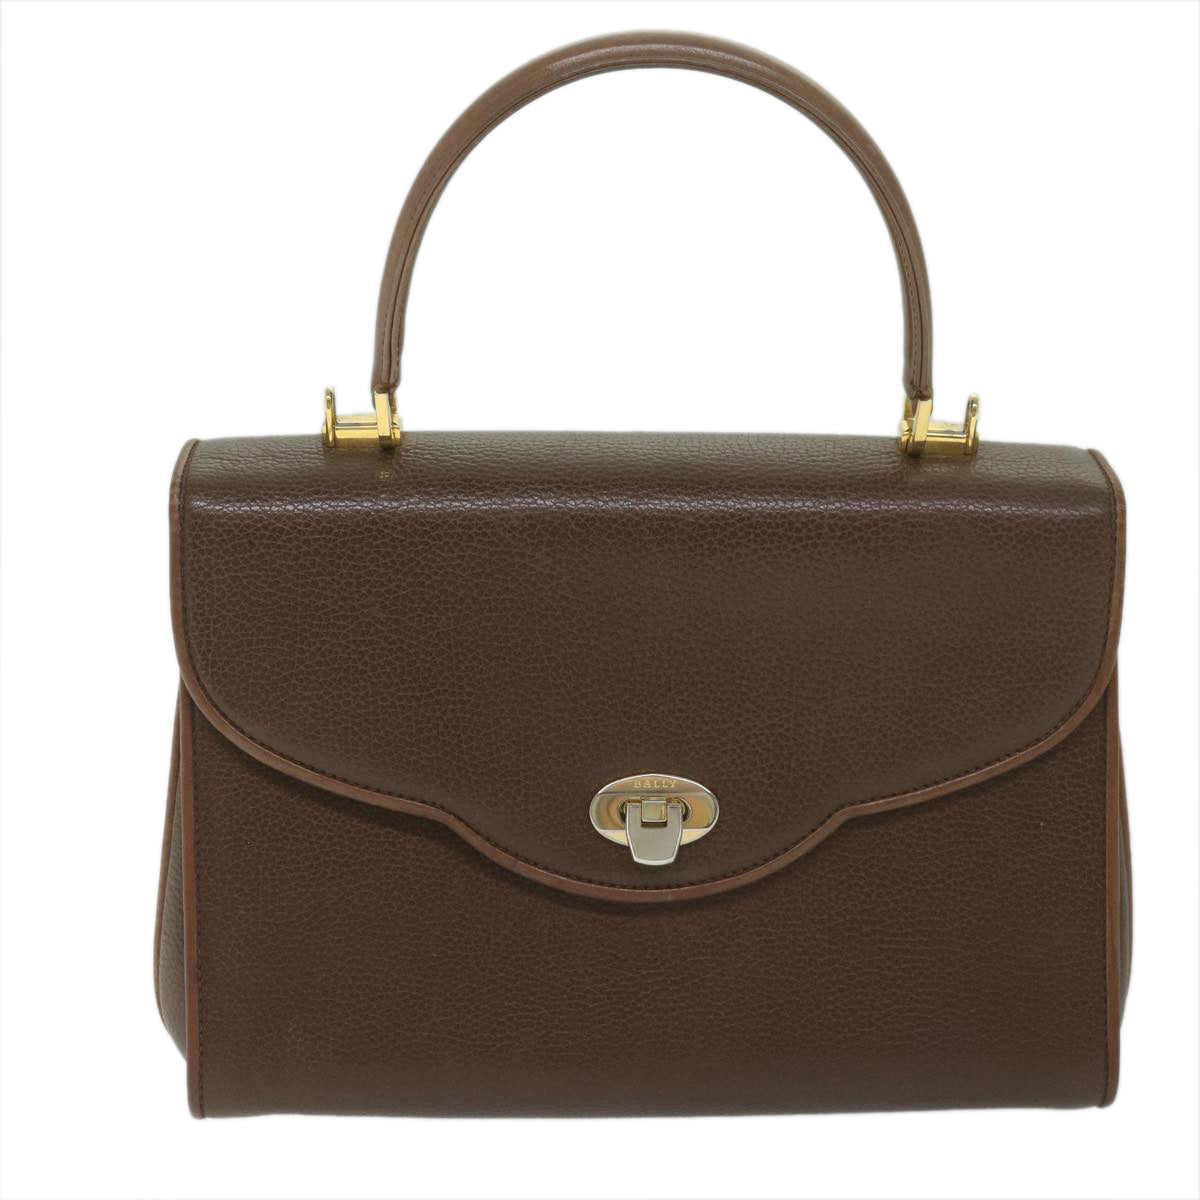 BALLY Hand Bag 2way Brown Auth bs10358